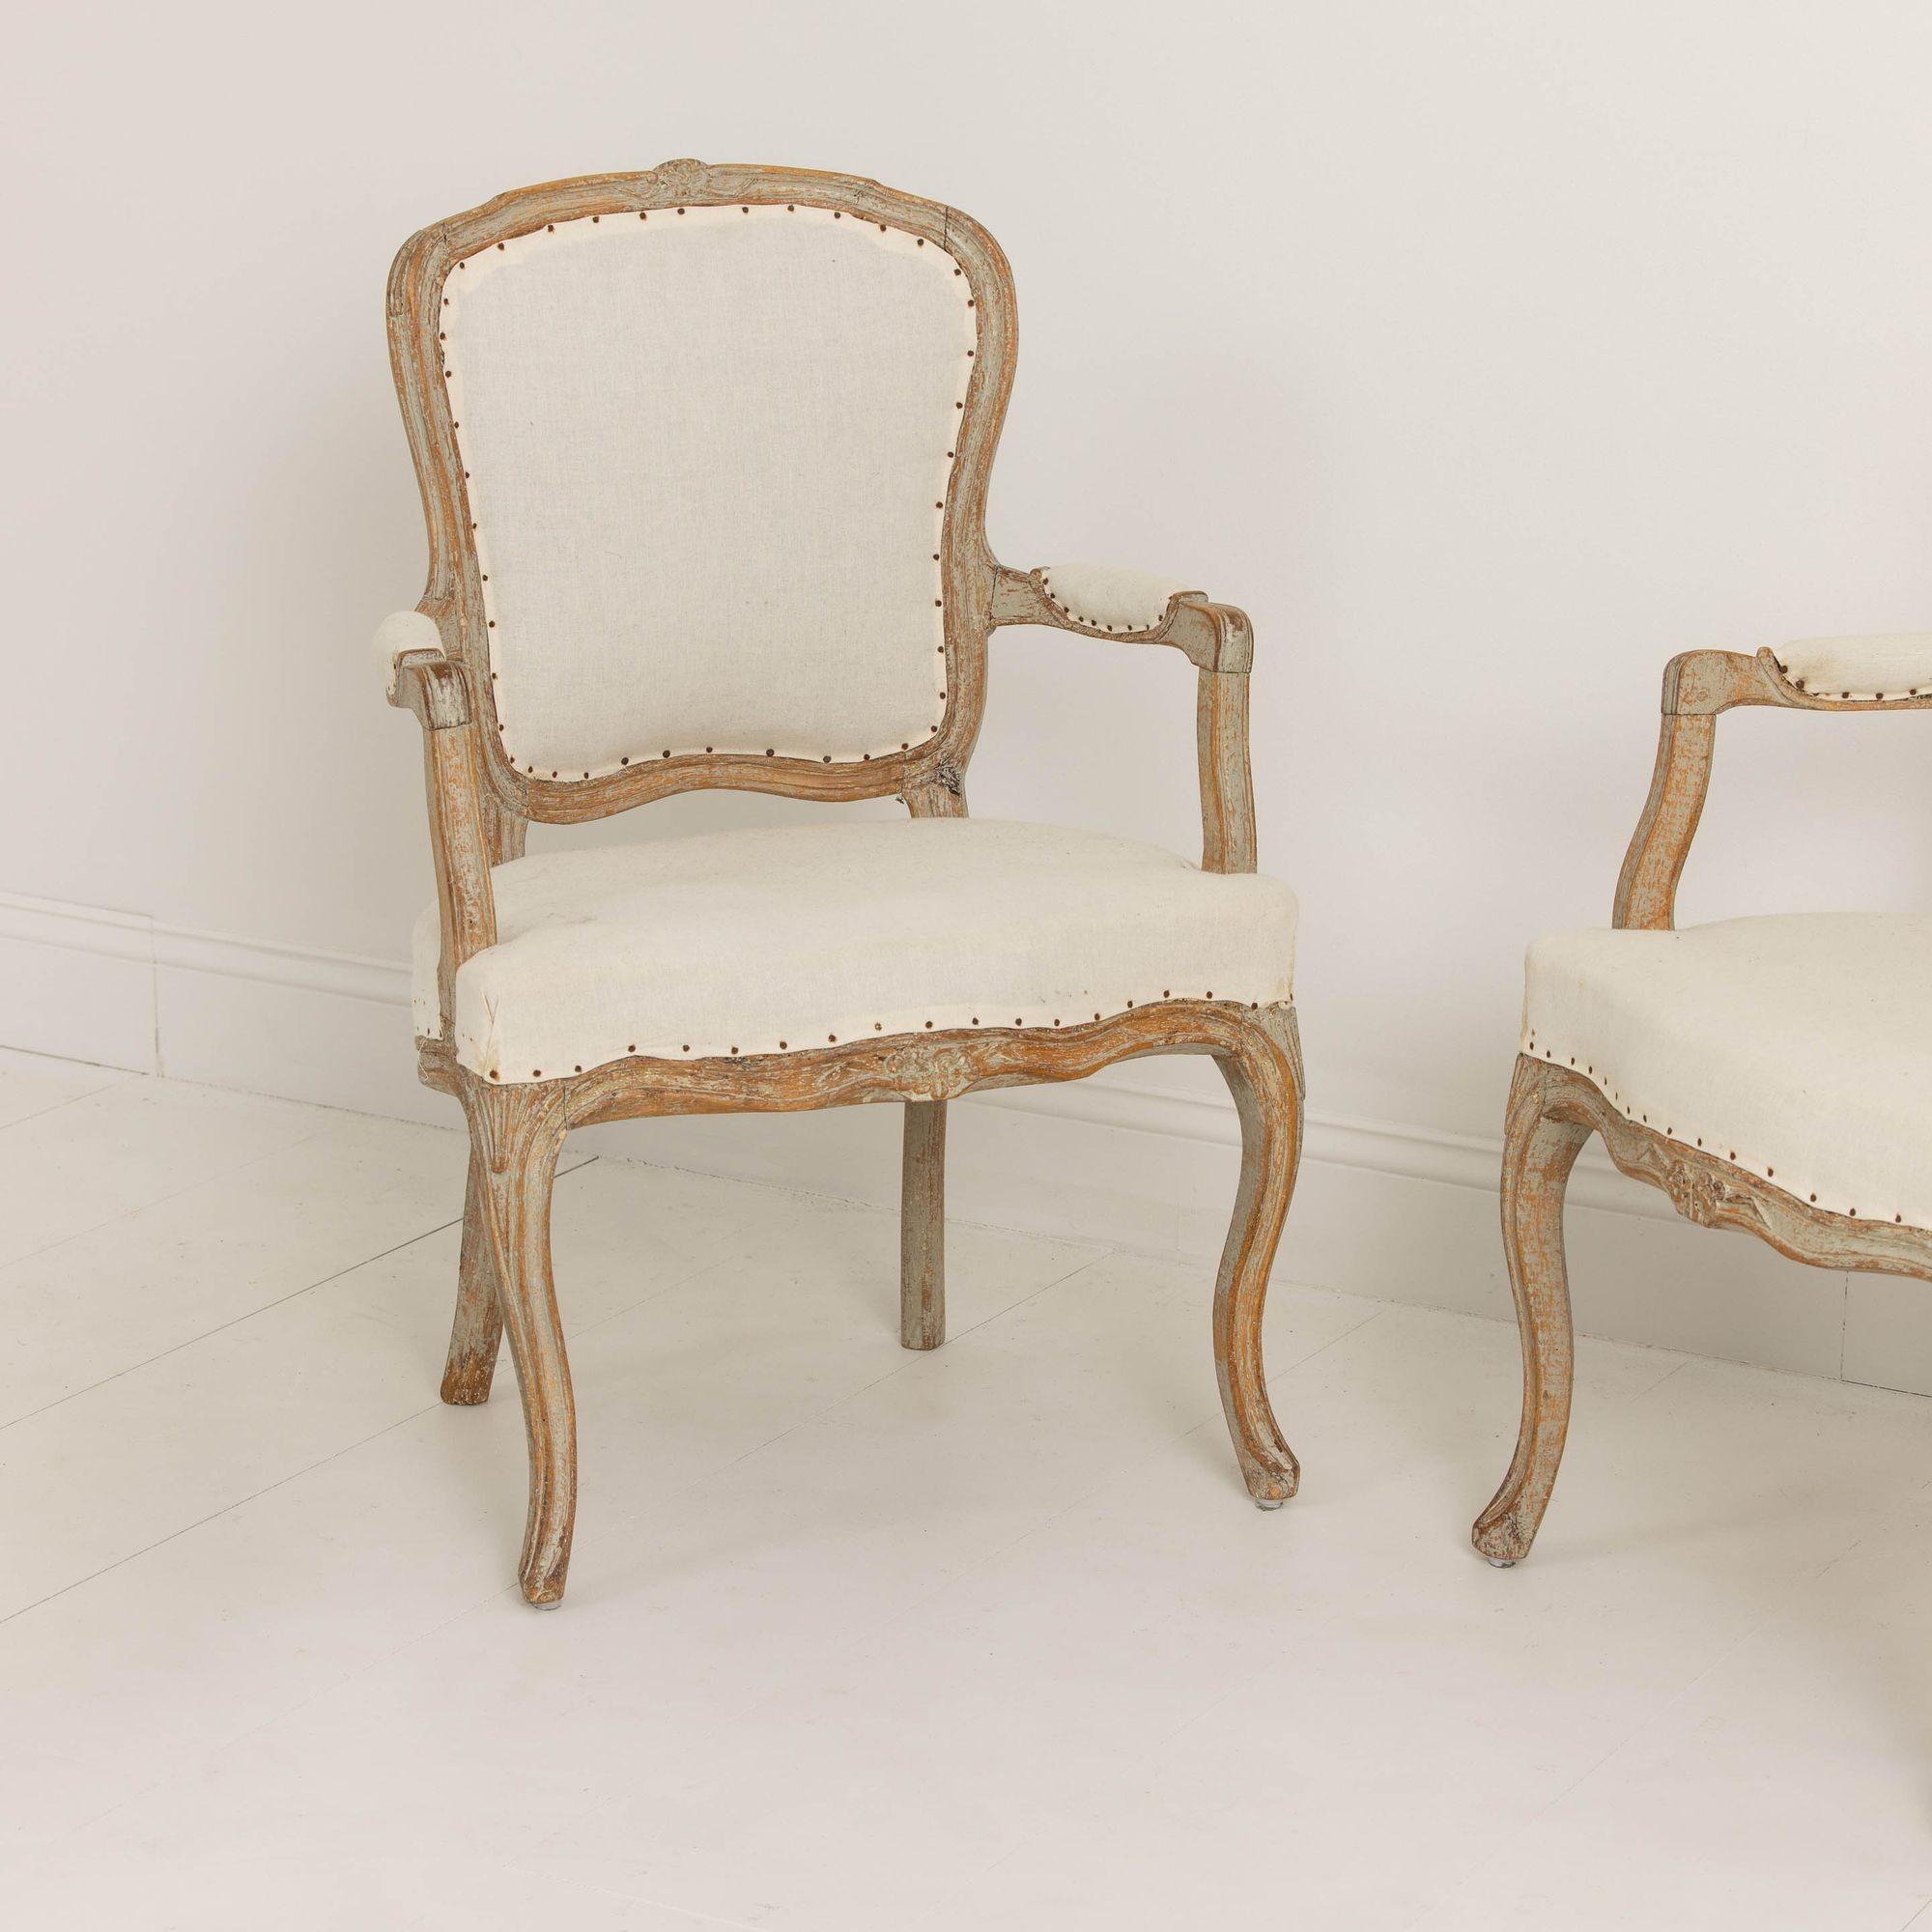 A pair of Swedish armchairs from the Rococo period hand-scraped to the original paint from Lindome, circa 1780. Elegantly shaped frame with beautiful carved flower motif on the chair back and seat front and raised upon cabriole legs.